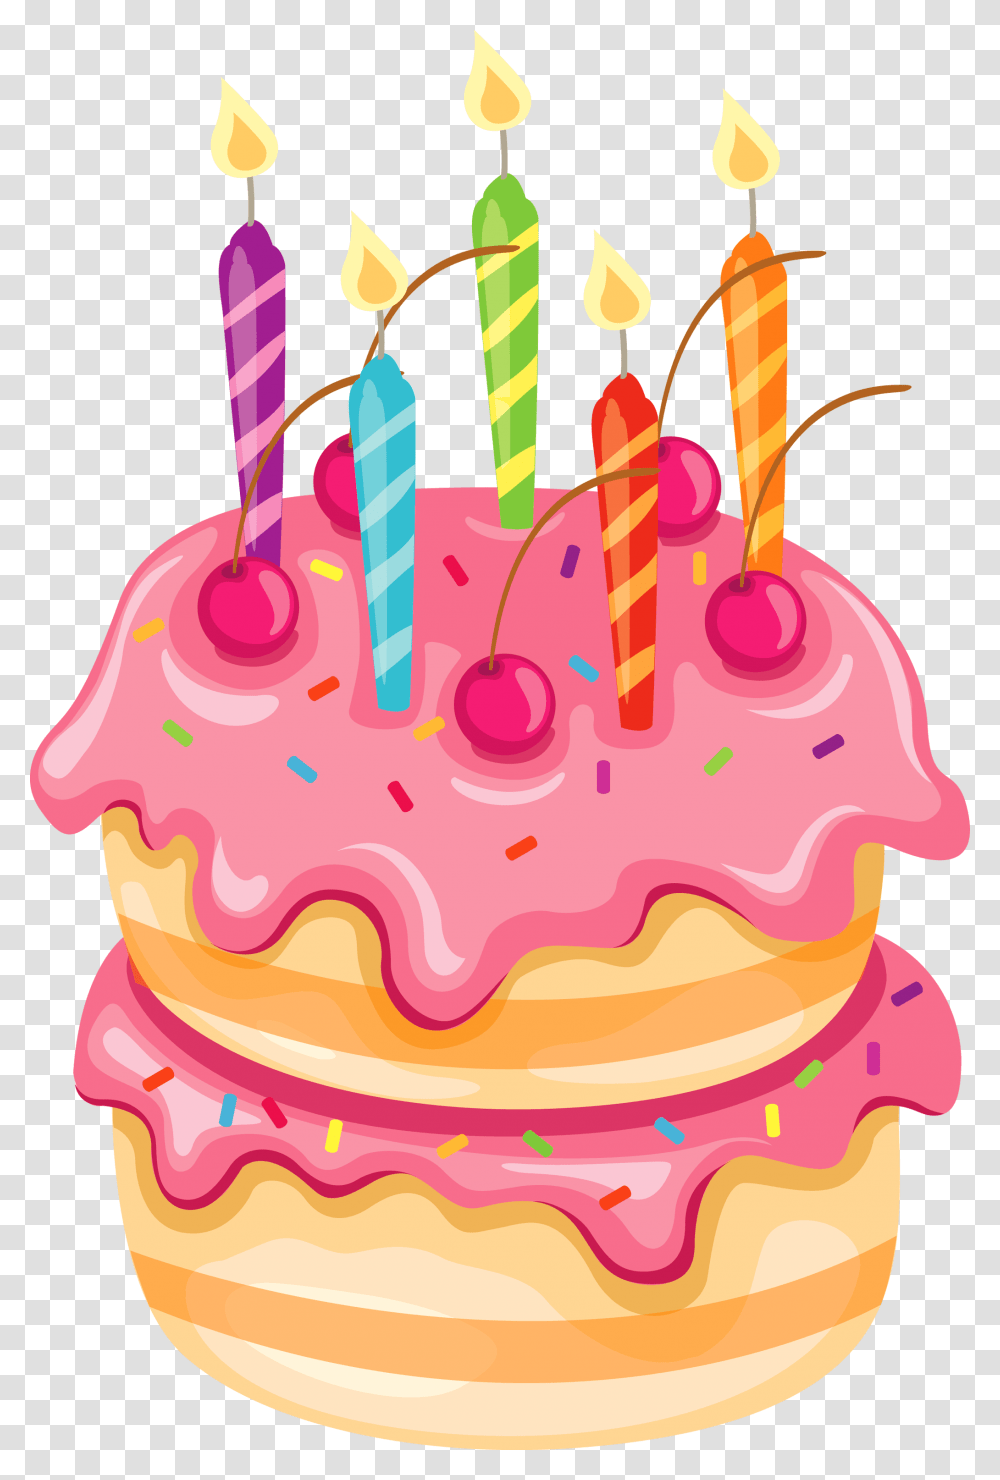 Girl's Birthday Cake Clip Art, Dessert, Food, Sweets, Confectionery ...